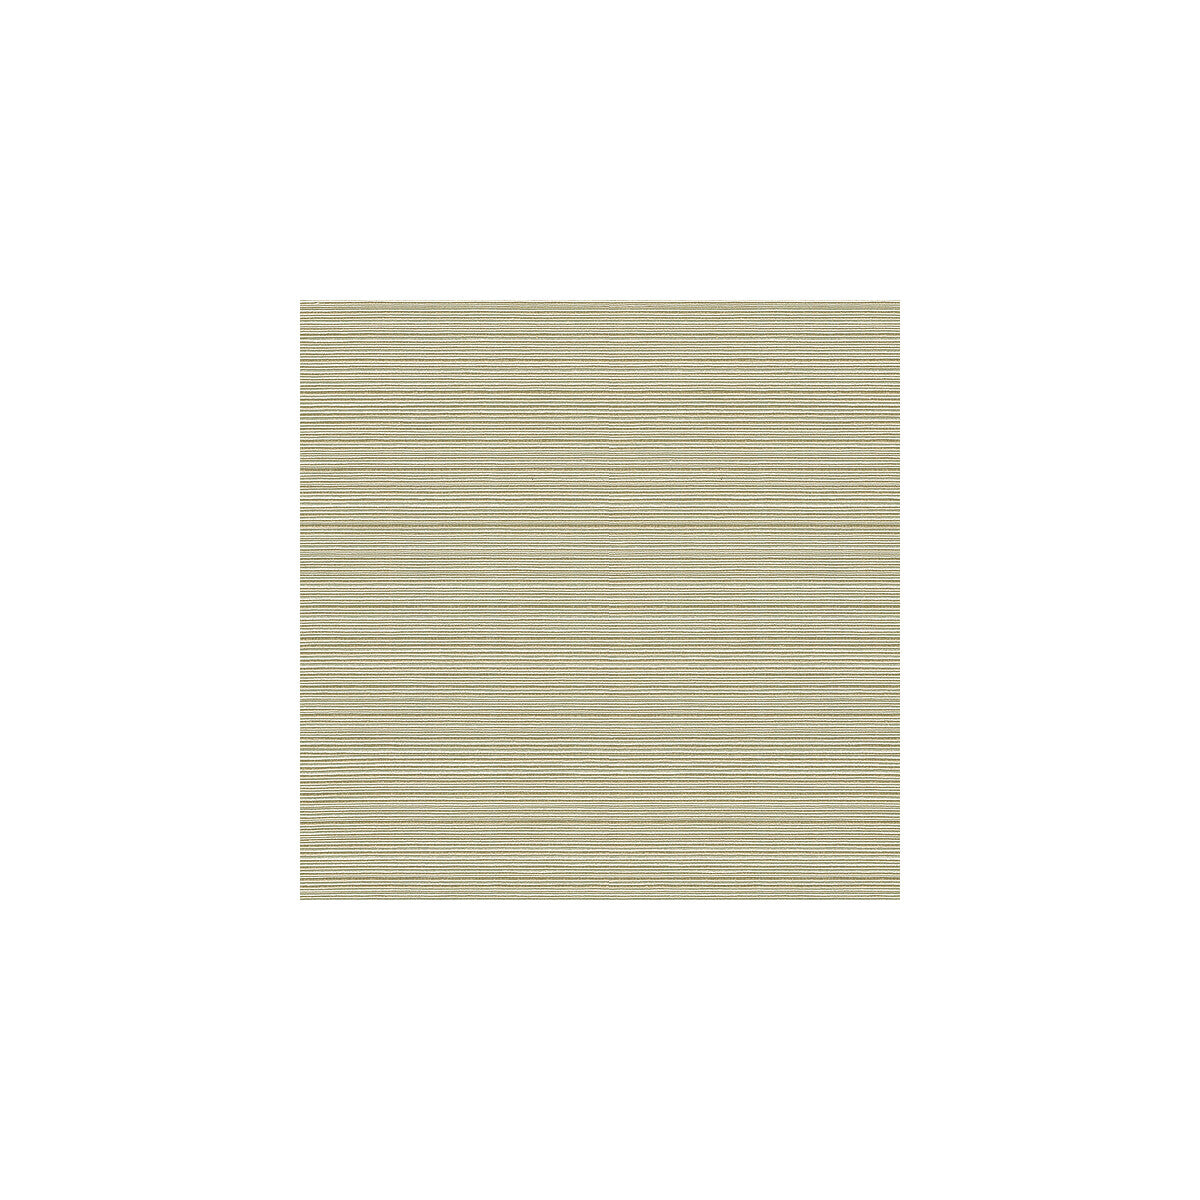 Campania fabric in dove color - pattern 32497.16.0 - by Kravet Basics